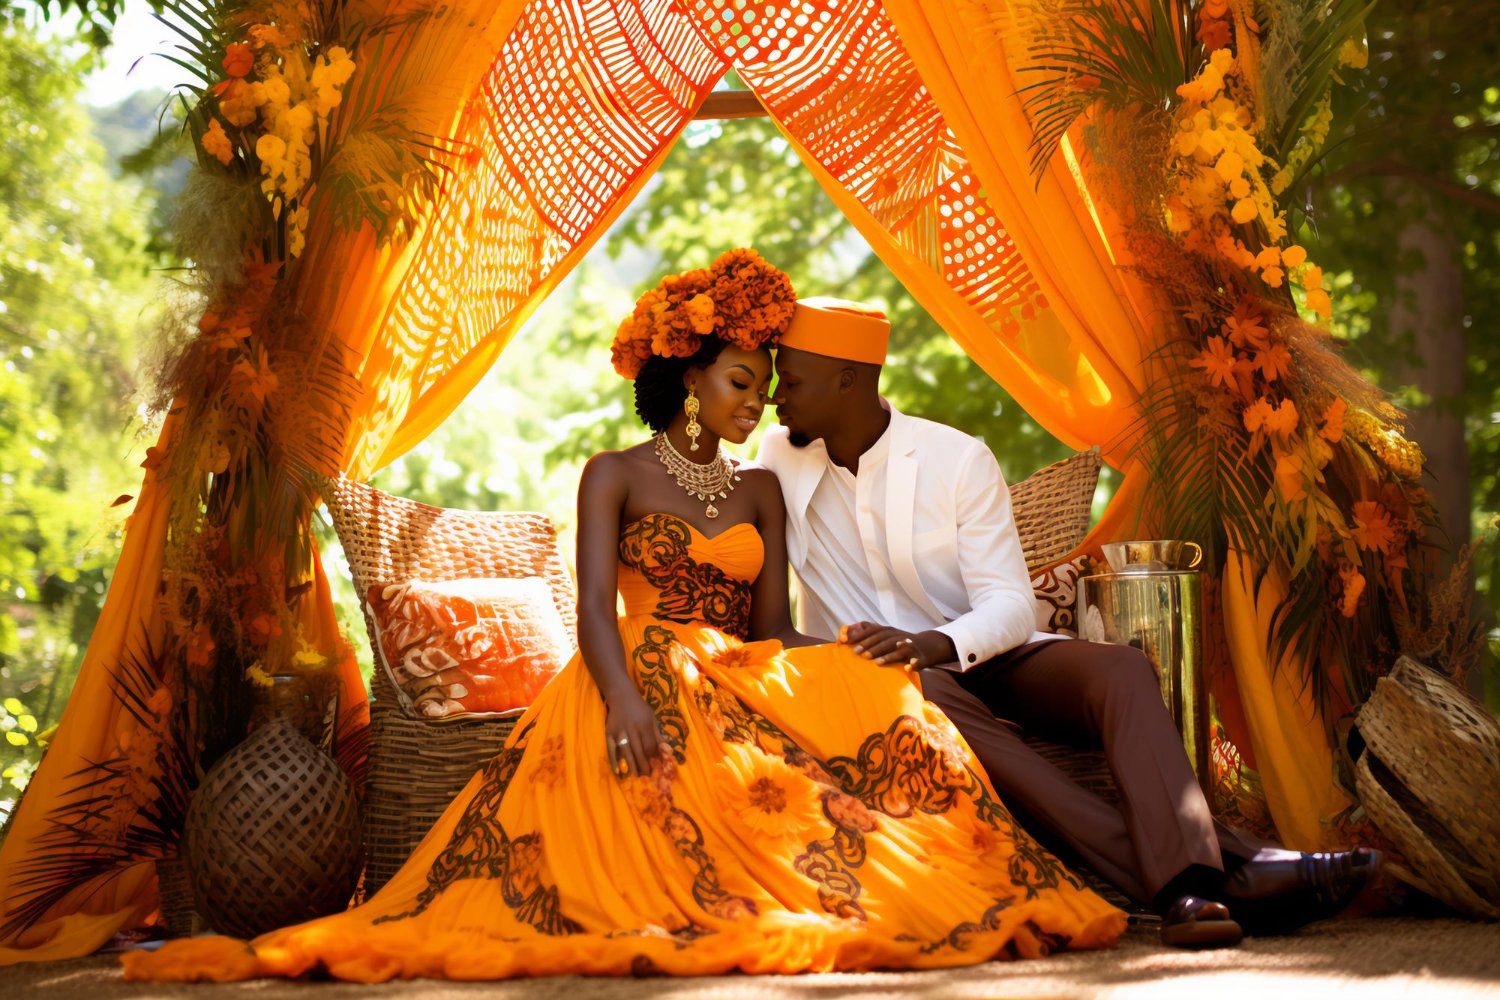 Tangerine Dreams Embracing African Heritage in Exquisite Wedding Palettes